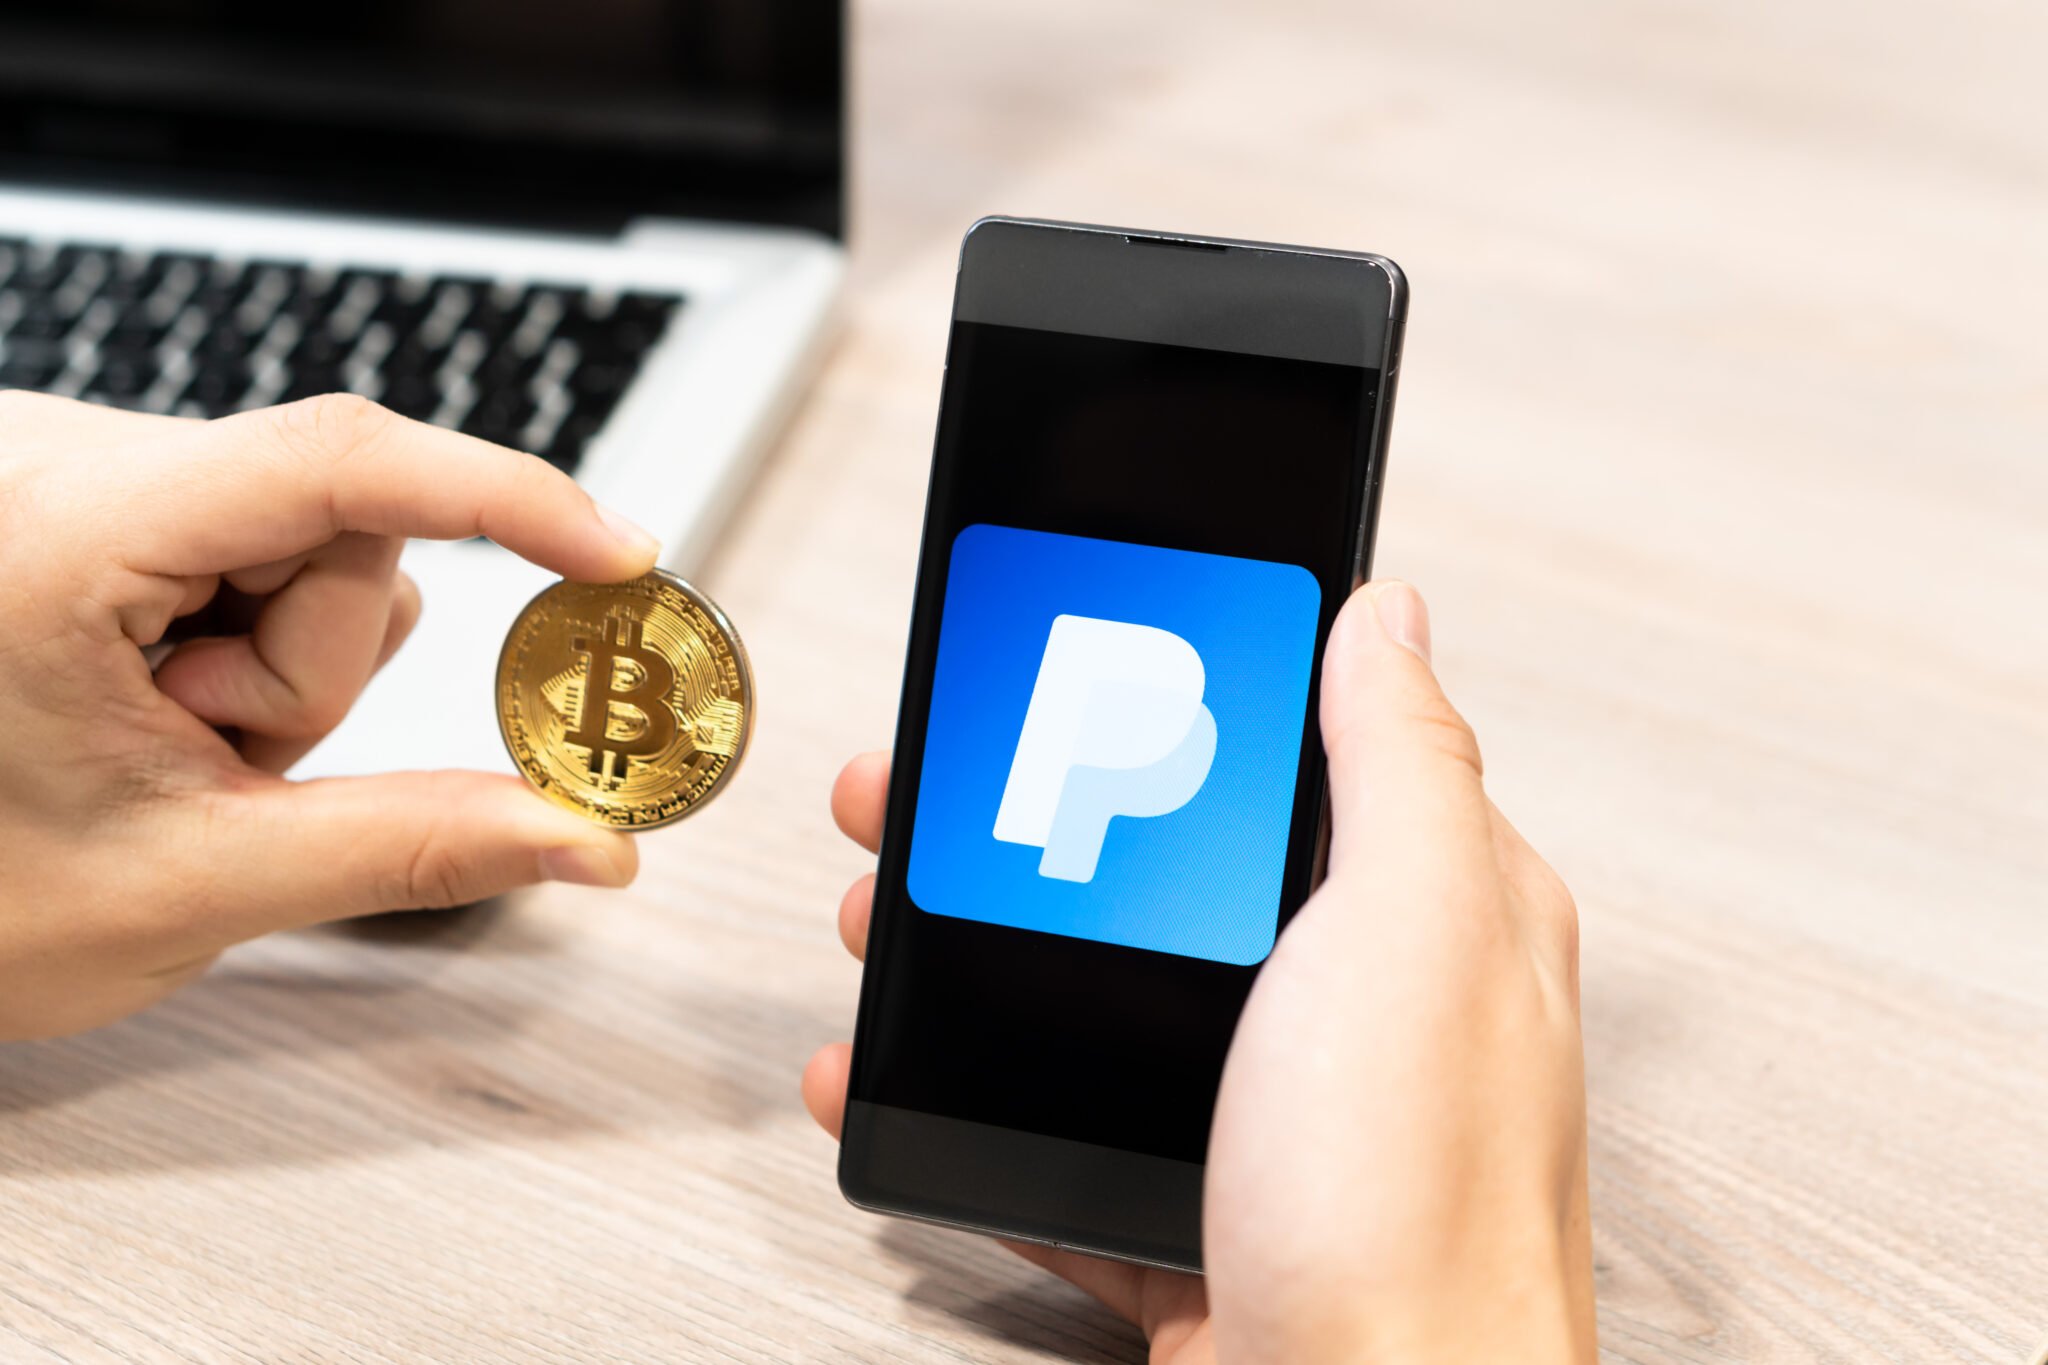 Human hand holding mobile phone and Bitcoin coin - paypal logo displayed on phone,, computer laptop in the background. Slovenia 13.02.2019